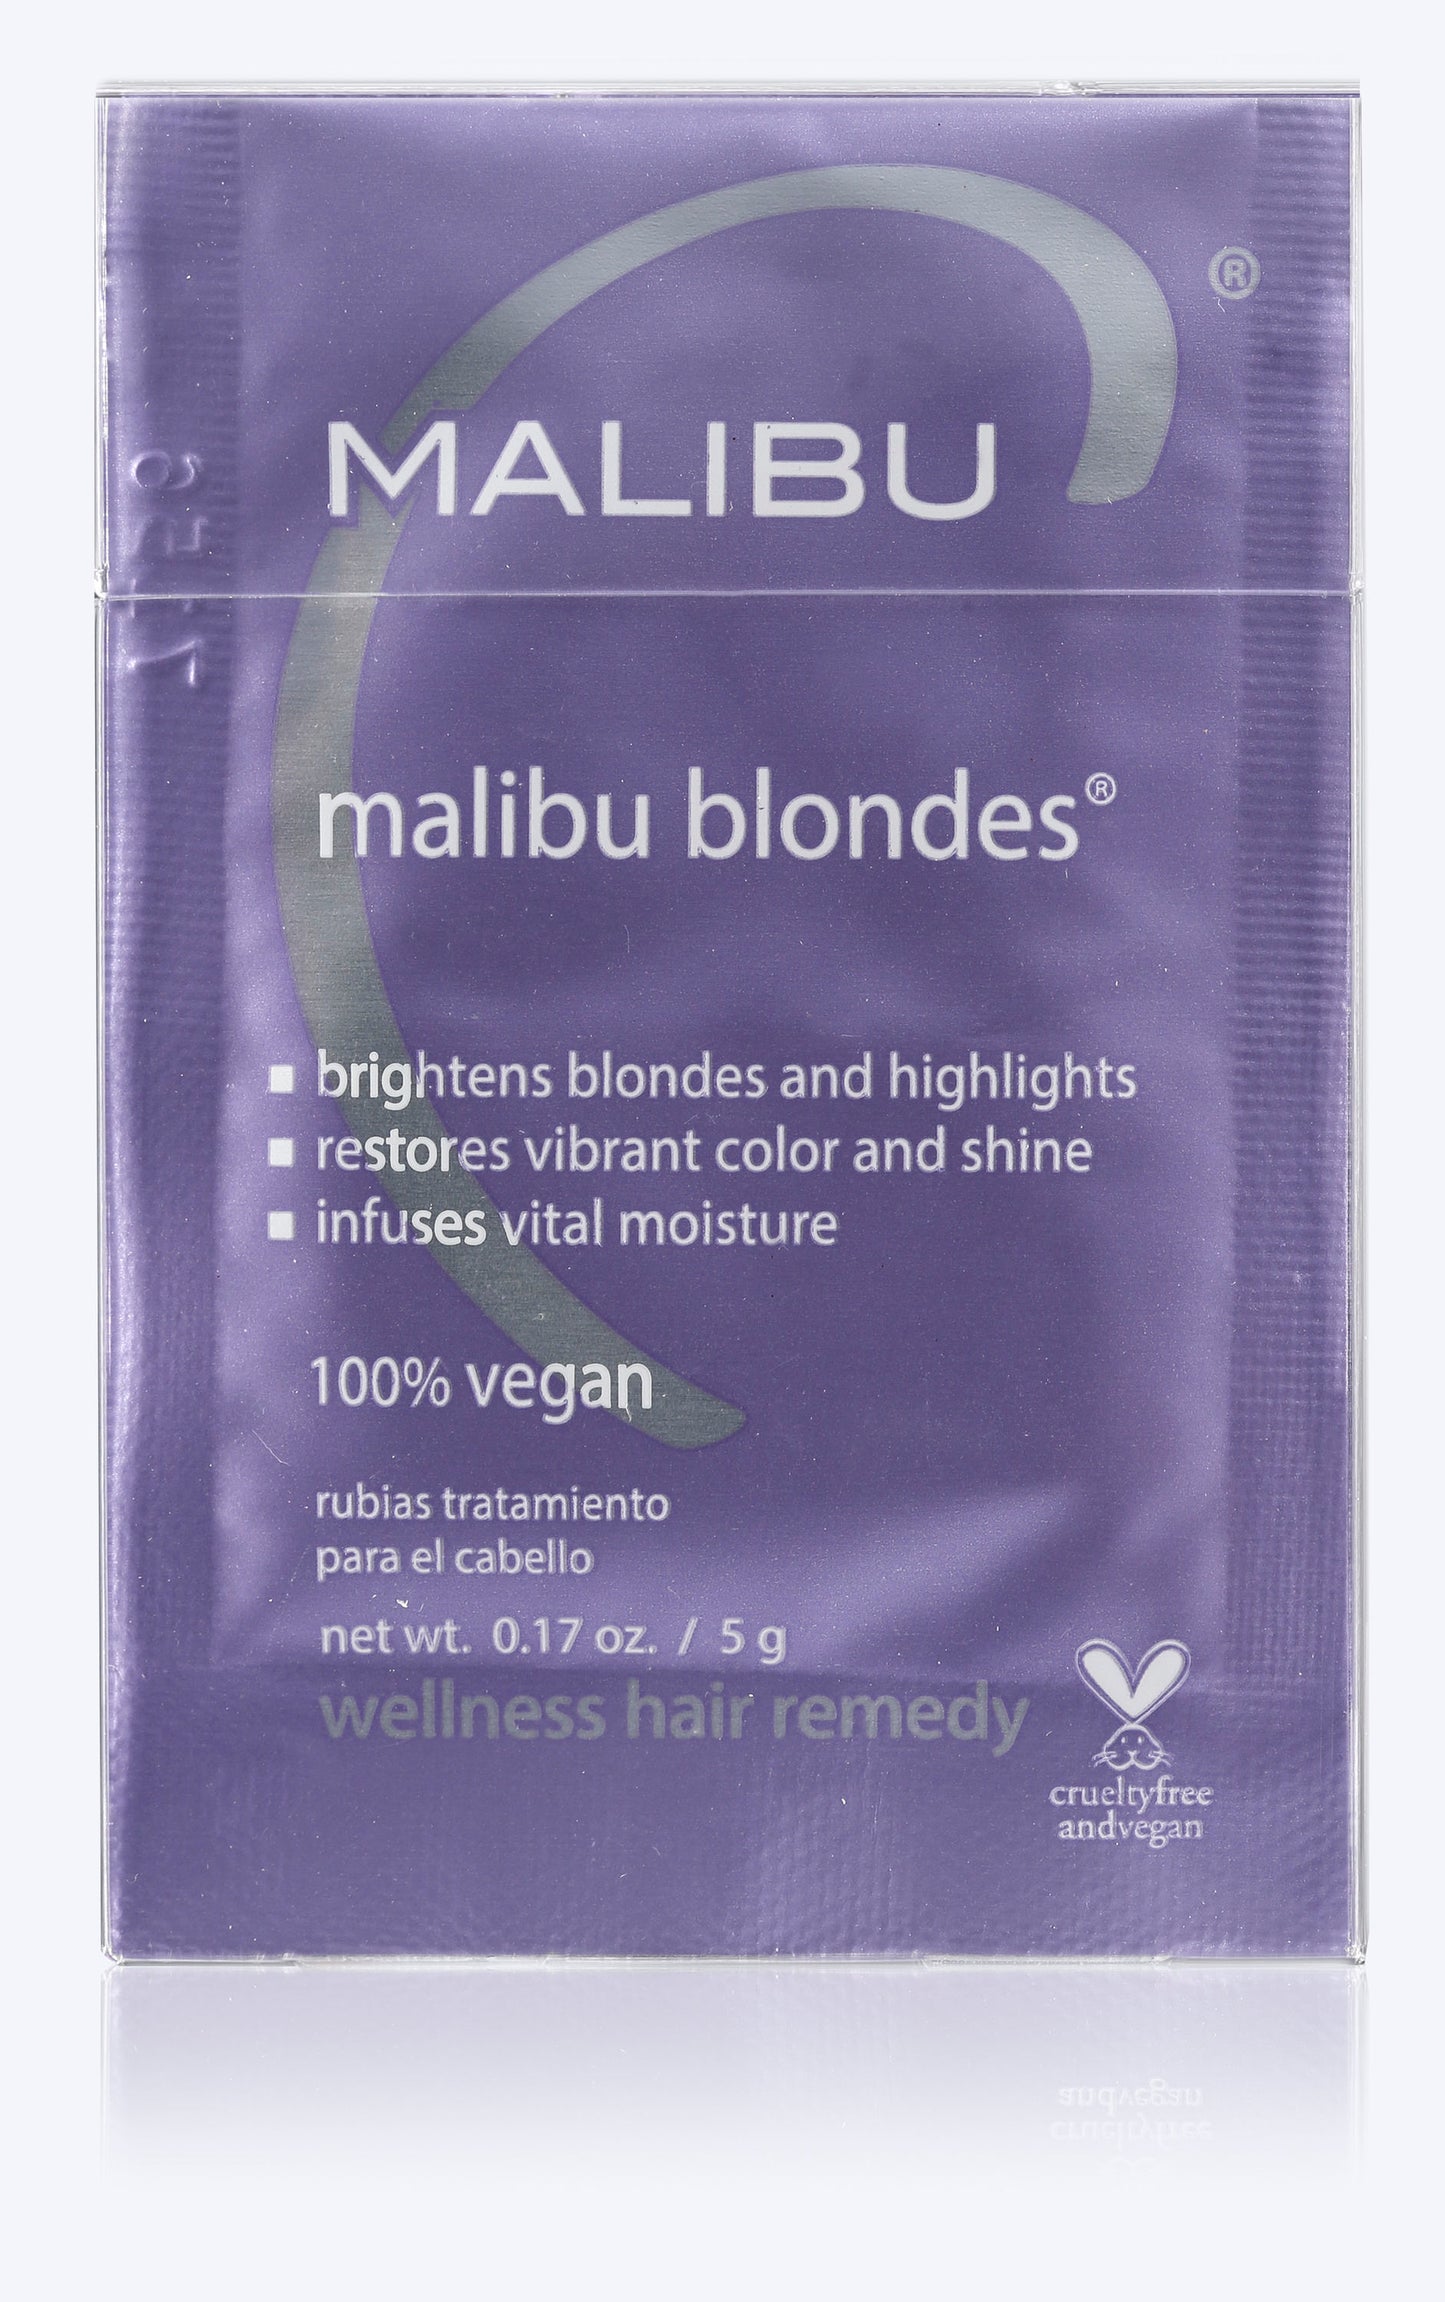 Malibu C Blondes Wellness Hair Remedy For Vibrant & Bright Hair Pack of 12